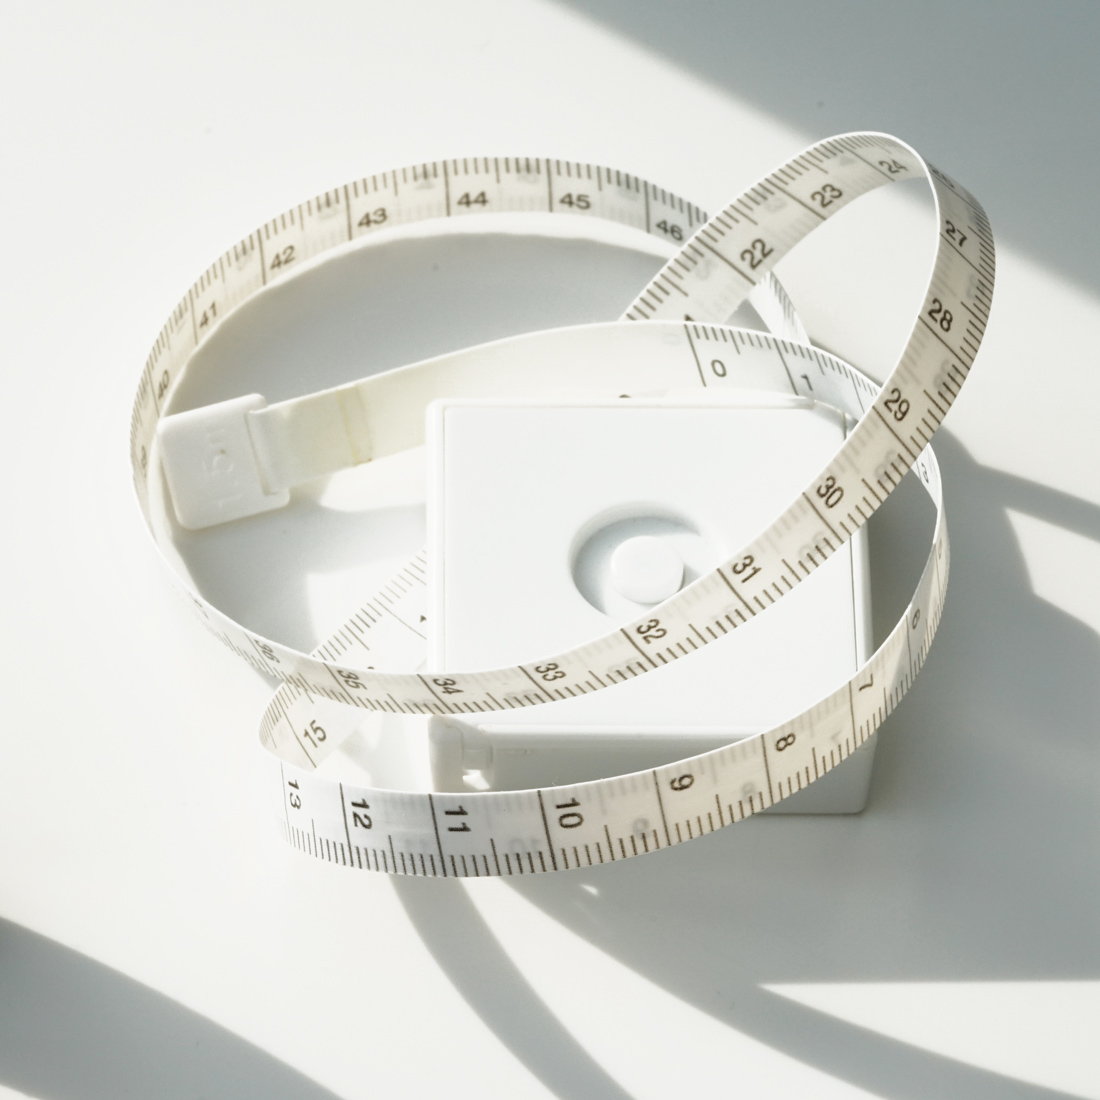 How To Know Your Ring Size Using Tape Measure How To Measure Your